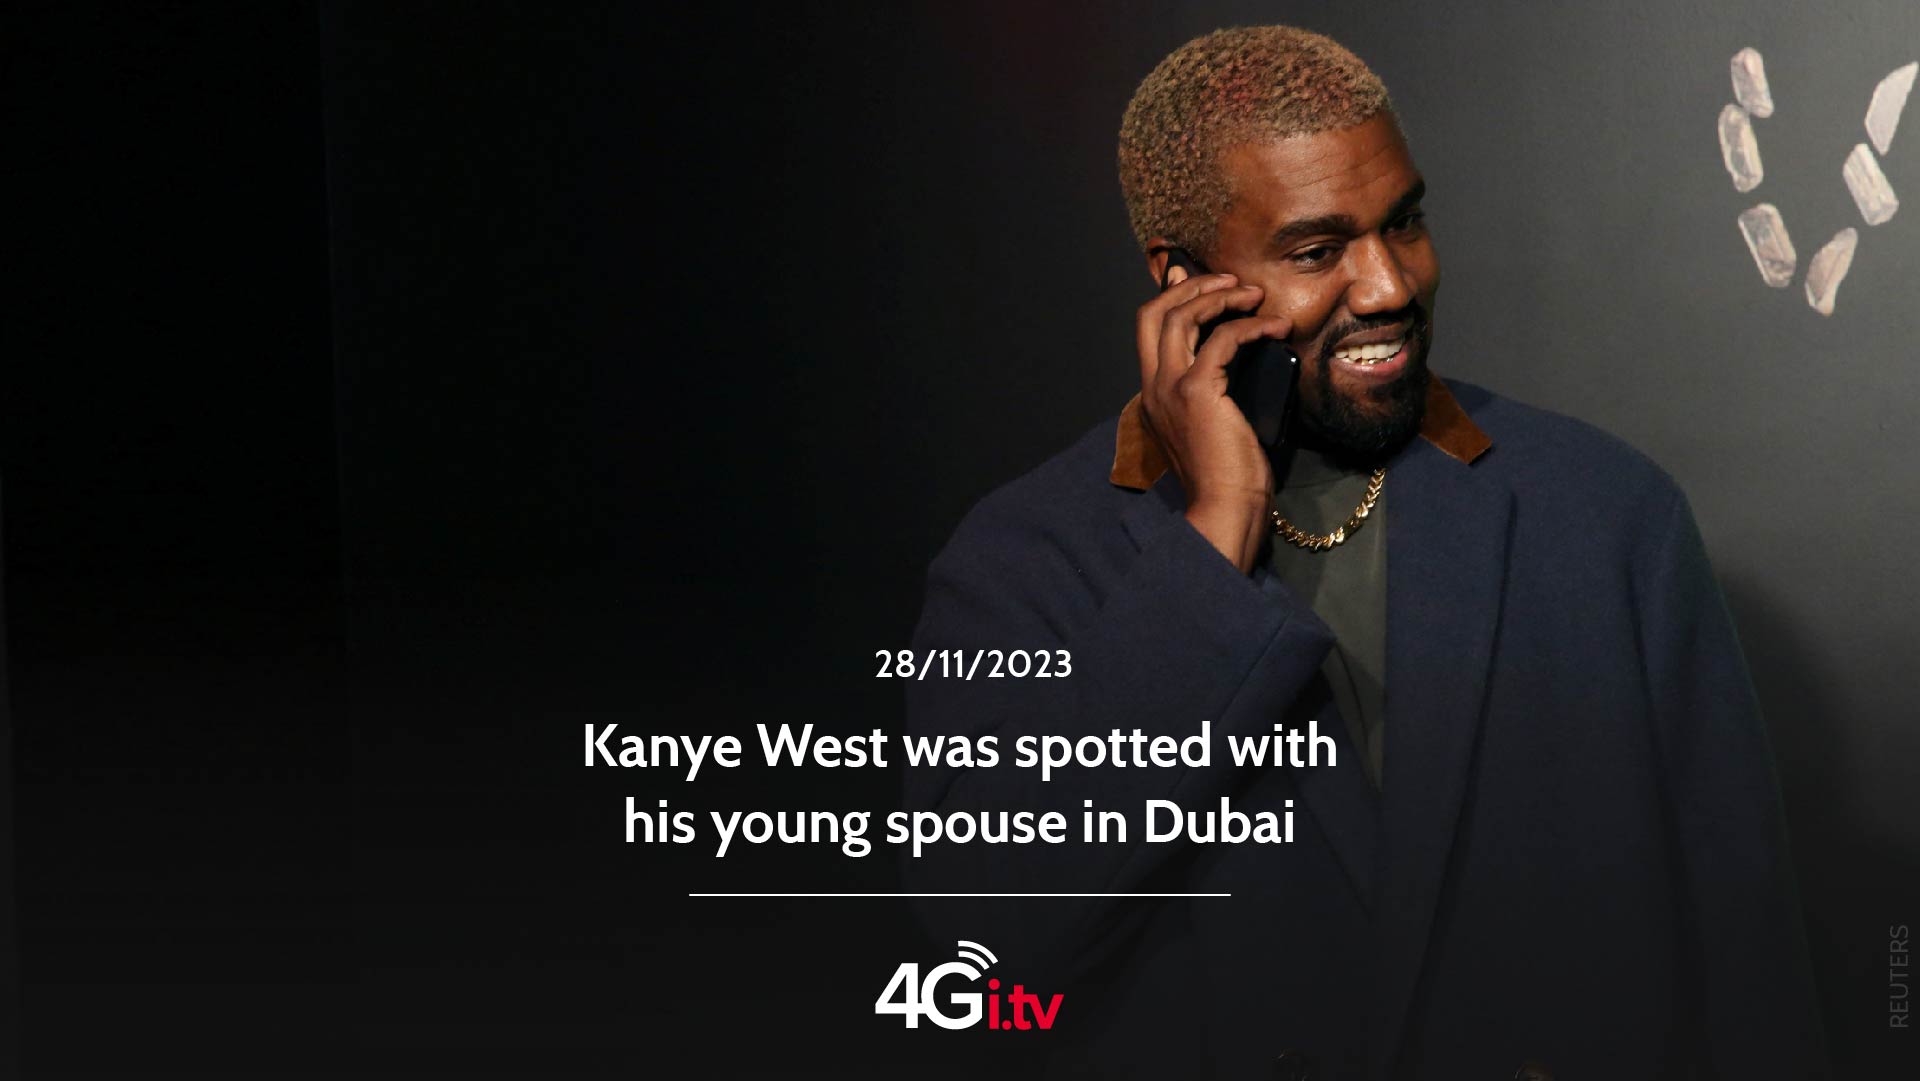 Lesen Sie mehr über den Artikel Kanye West was spotted with his young spouse in Dubai